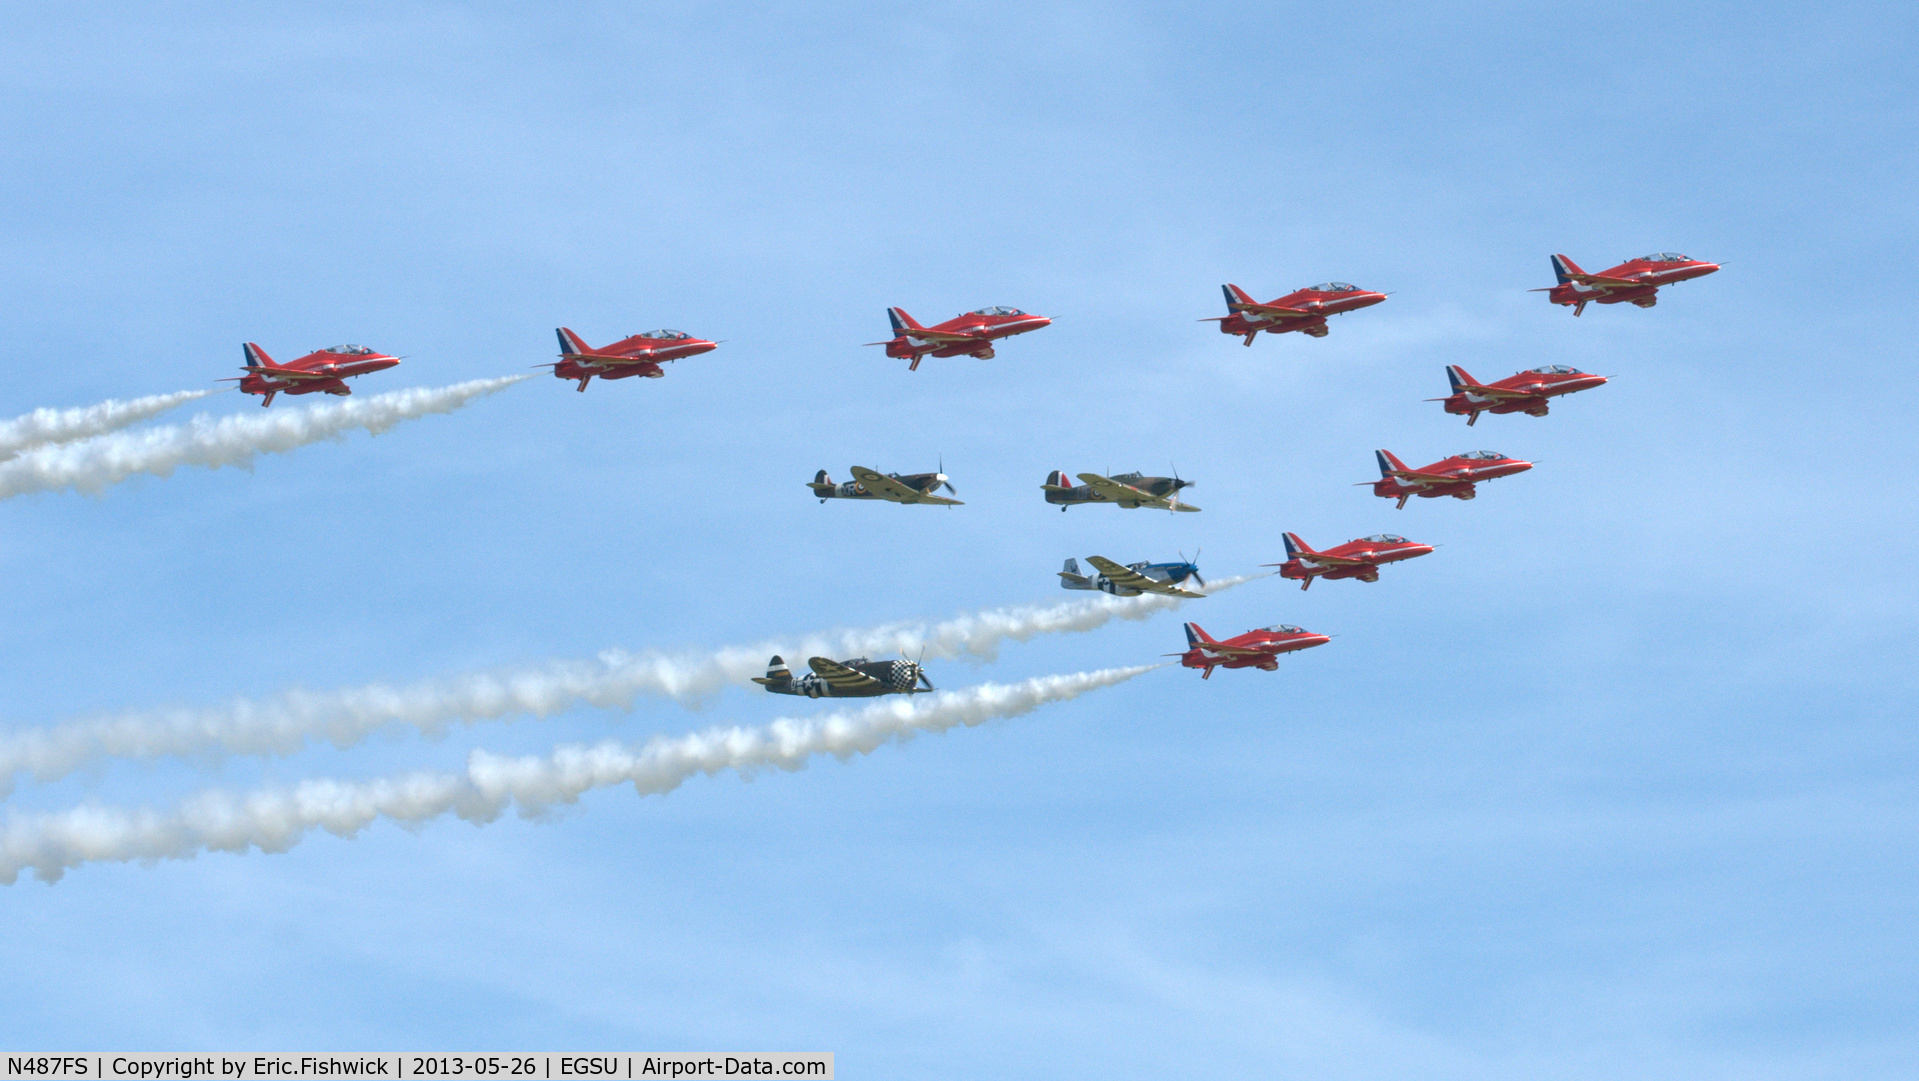 N487FS, 1943 North American P-51C Mustang C/N 103-26778, 45. 'Princess Elizabeth' and the other members of 'Eagle Squadron' with the Red Arrows at the IWM Spring Airshow, May 2013.